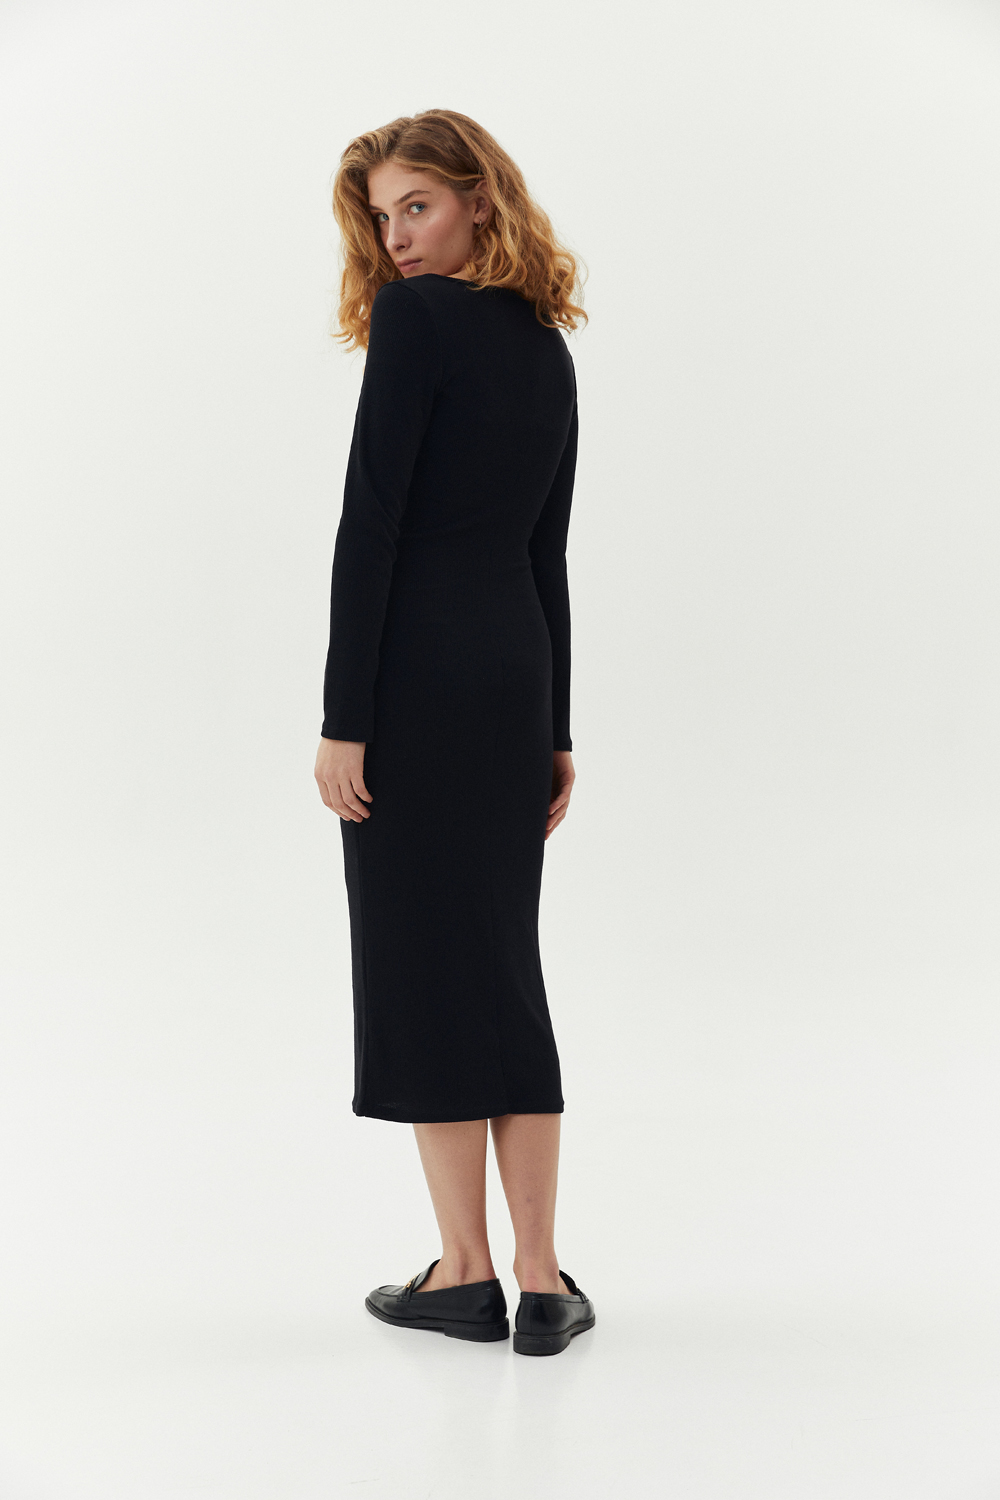 Black long sleeve fitted dress